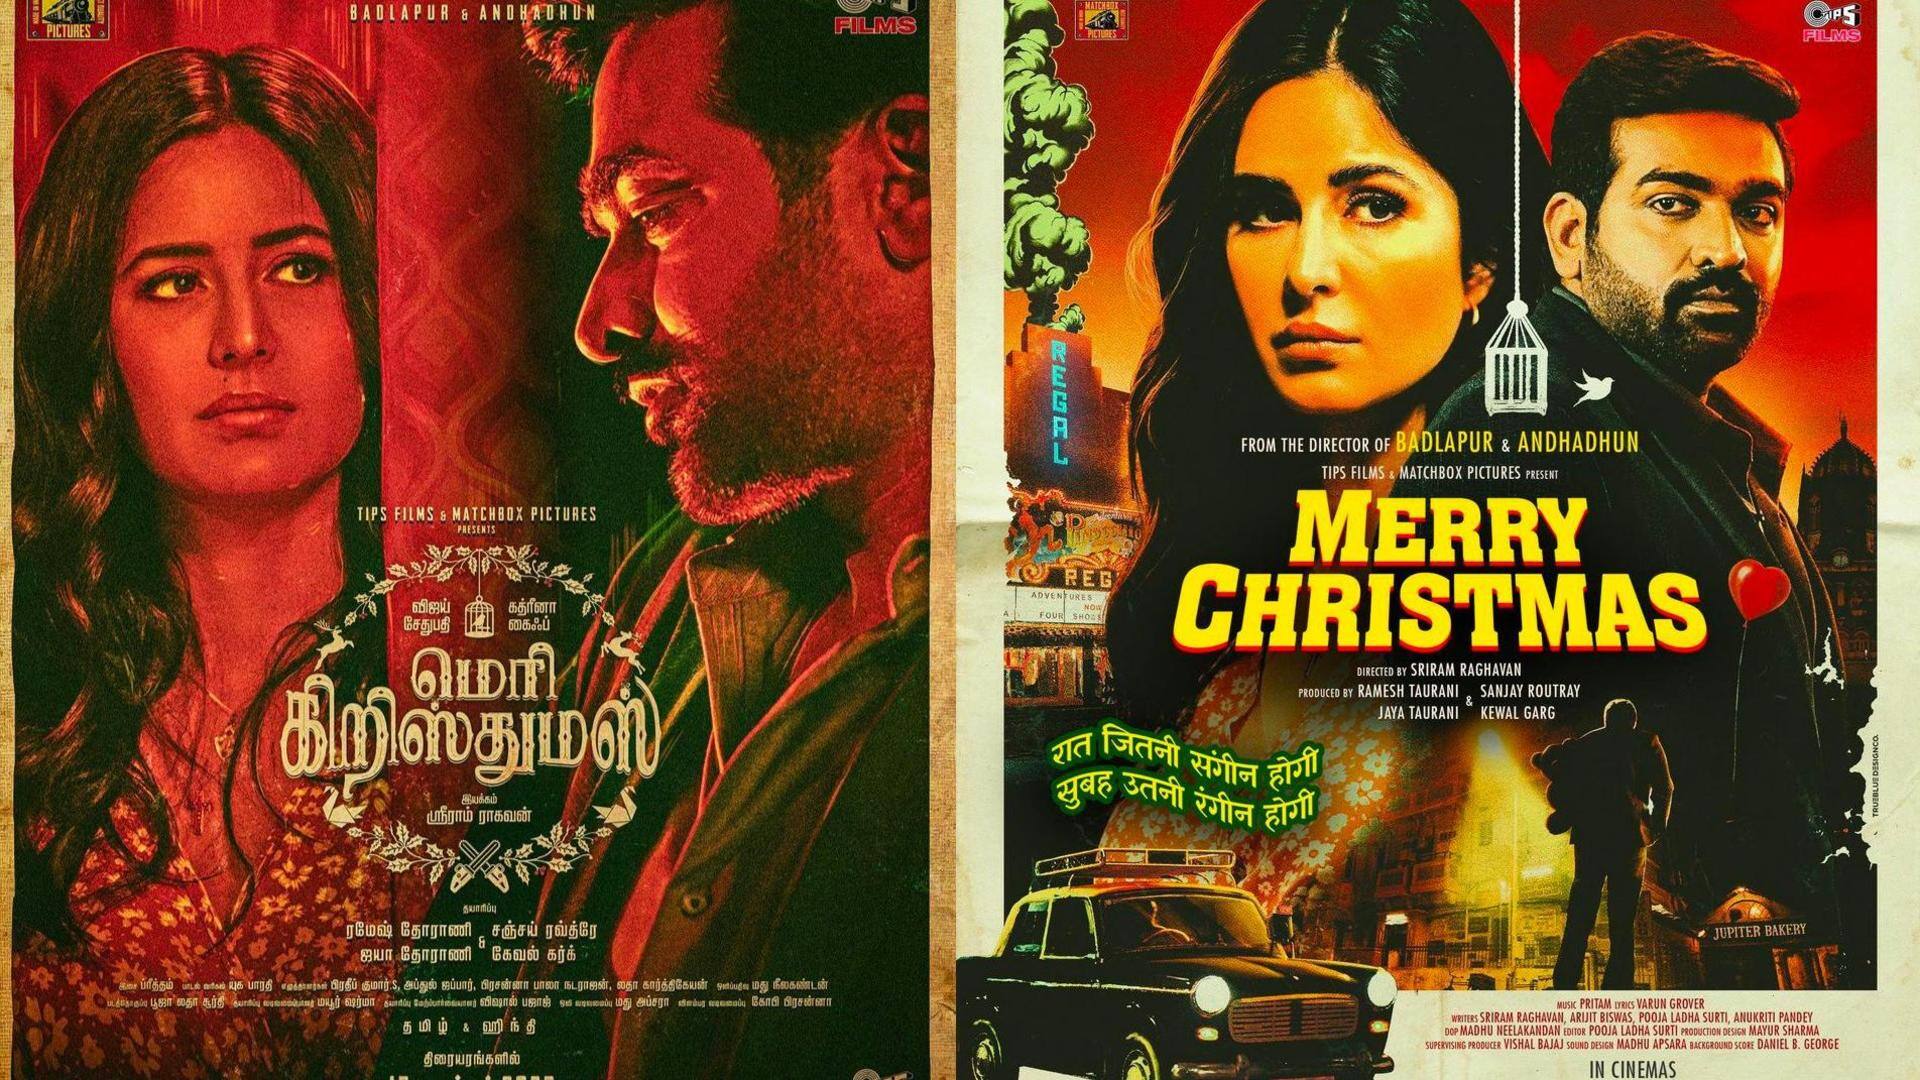 'Merry Christmas': Breaking down posters that mimic vintage horror films